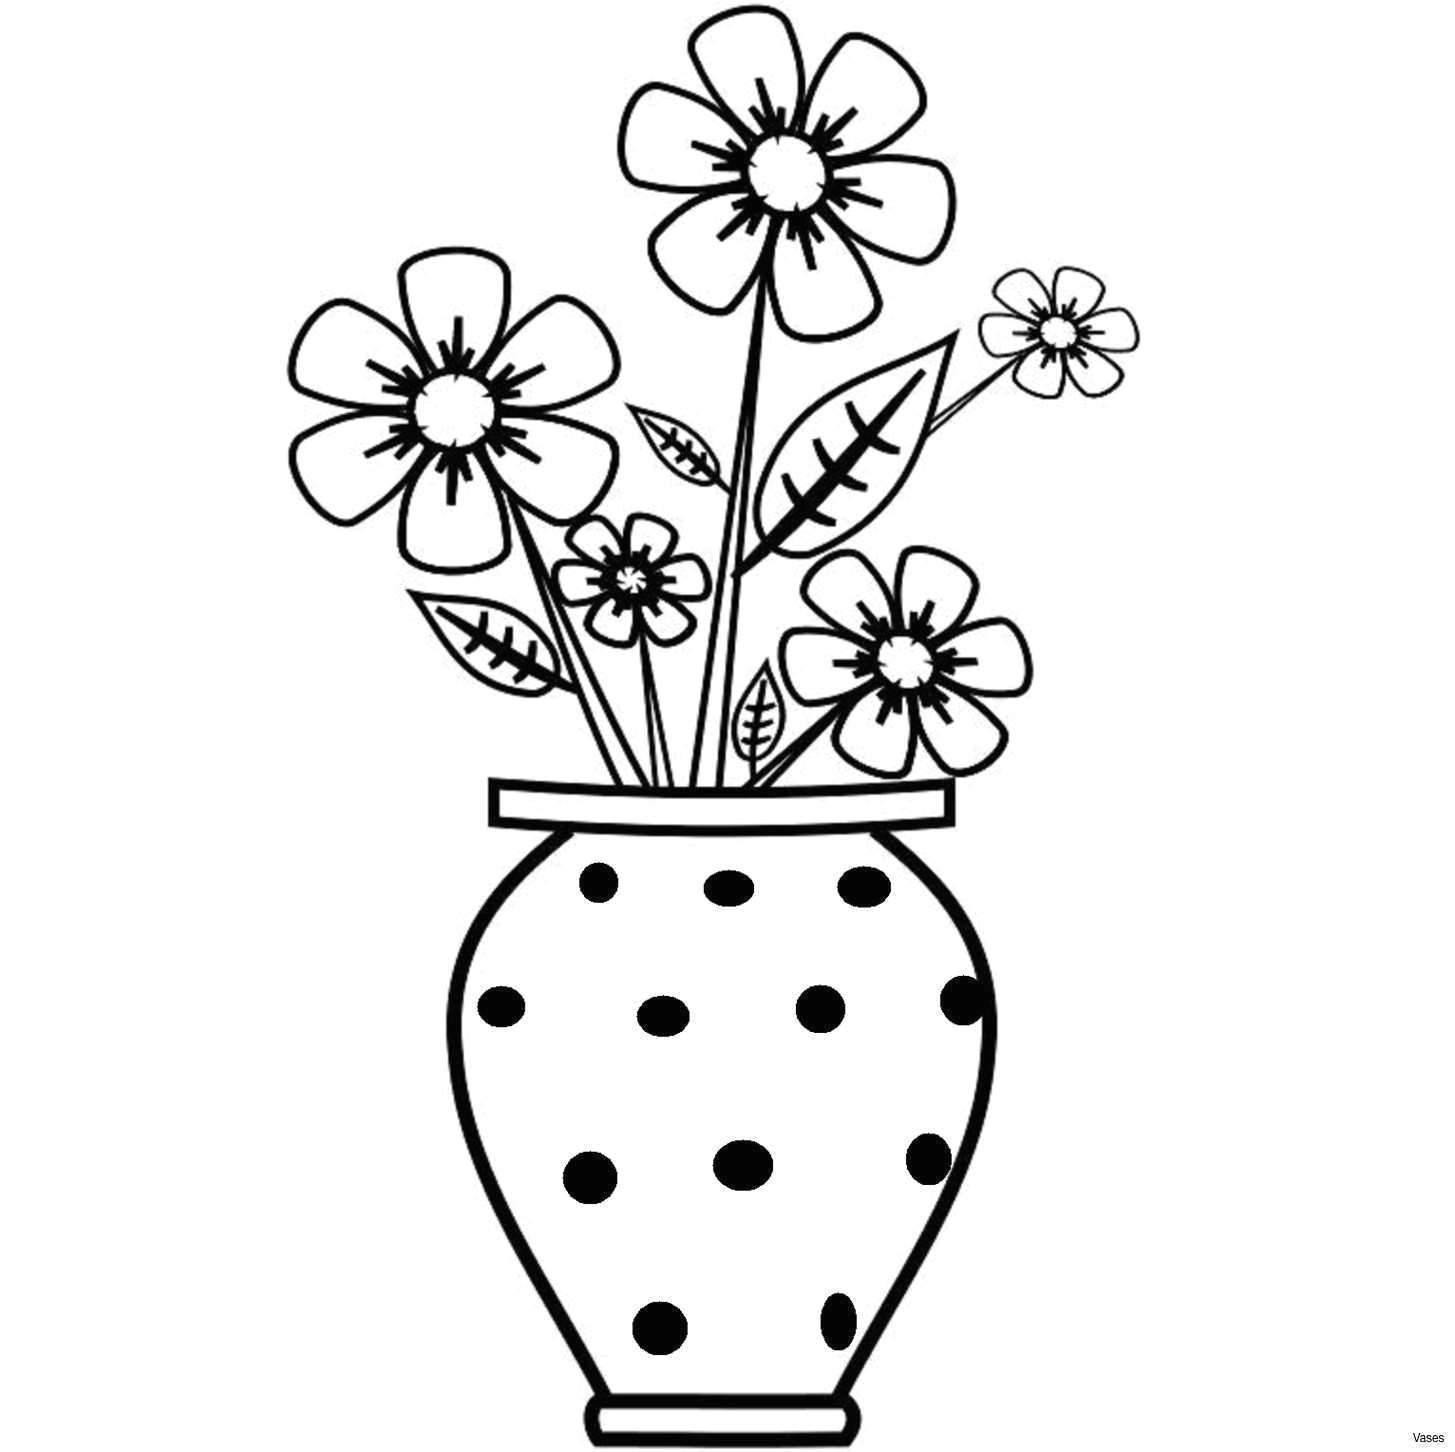 Line Drawing Of Flower Vase Free Download Image Beautiful Black and White Art 650 649 Black